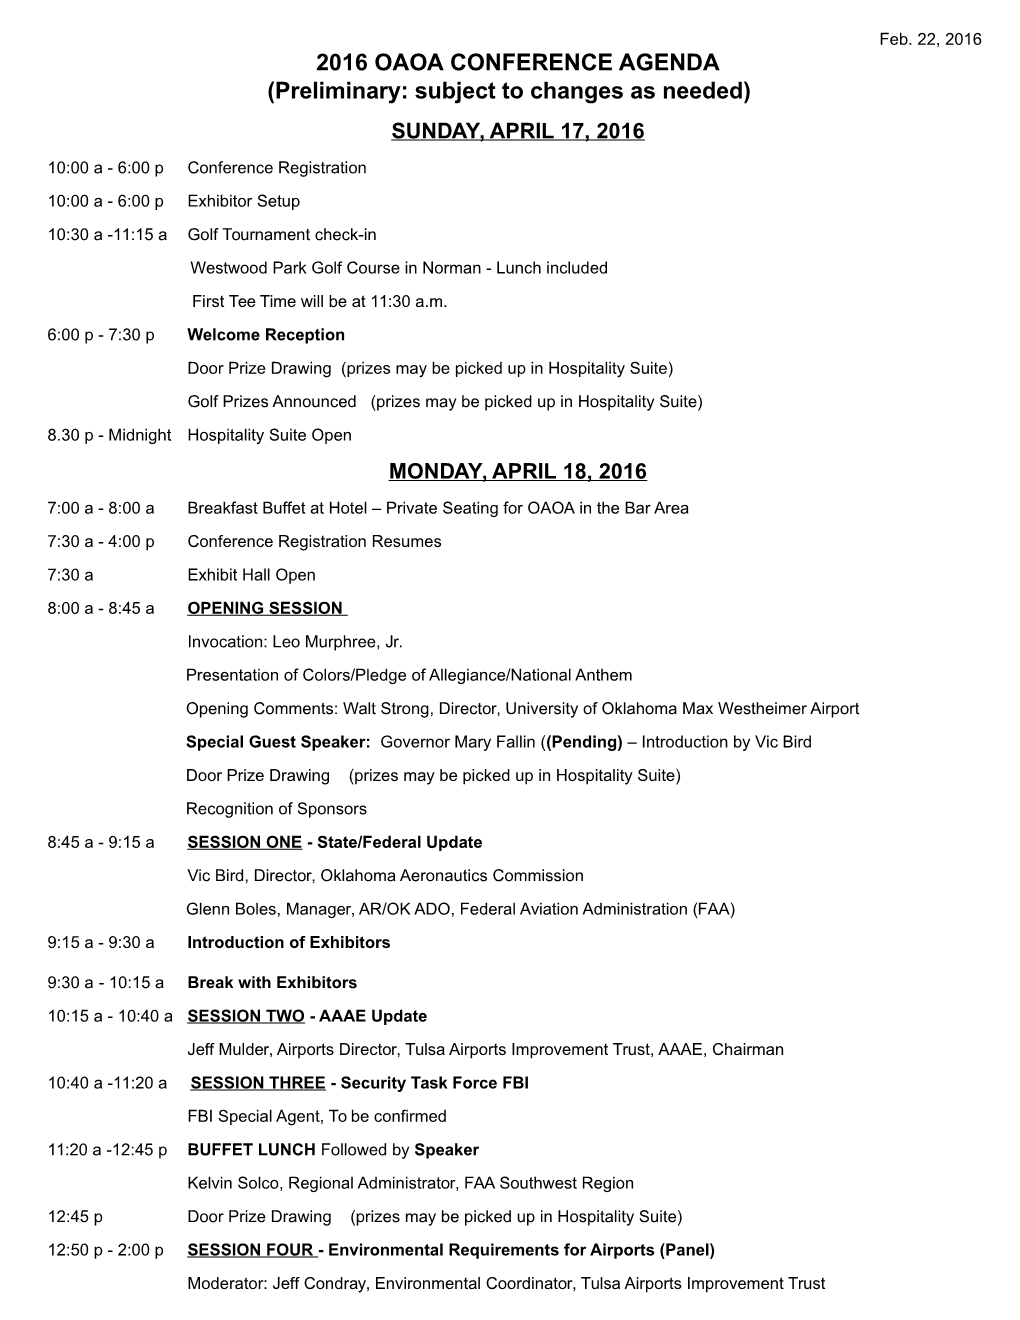 2016 OAOA CONFERENCE AGENDA (Preliminary: Subject to Changes As Needed)